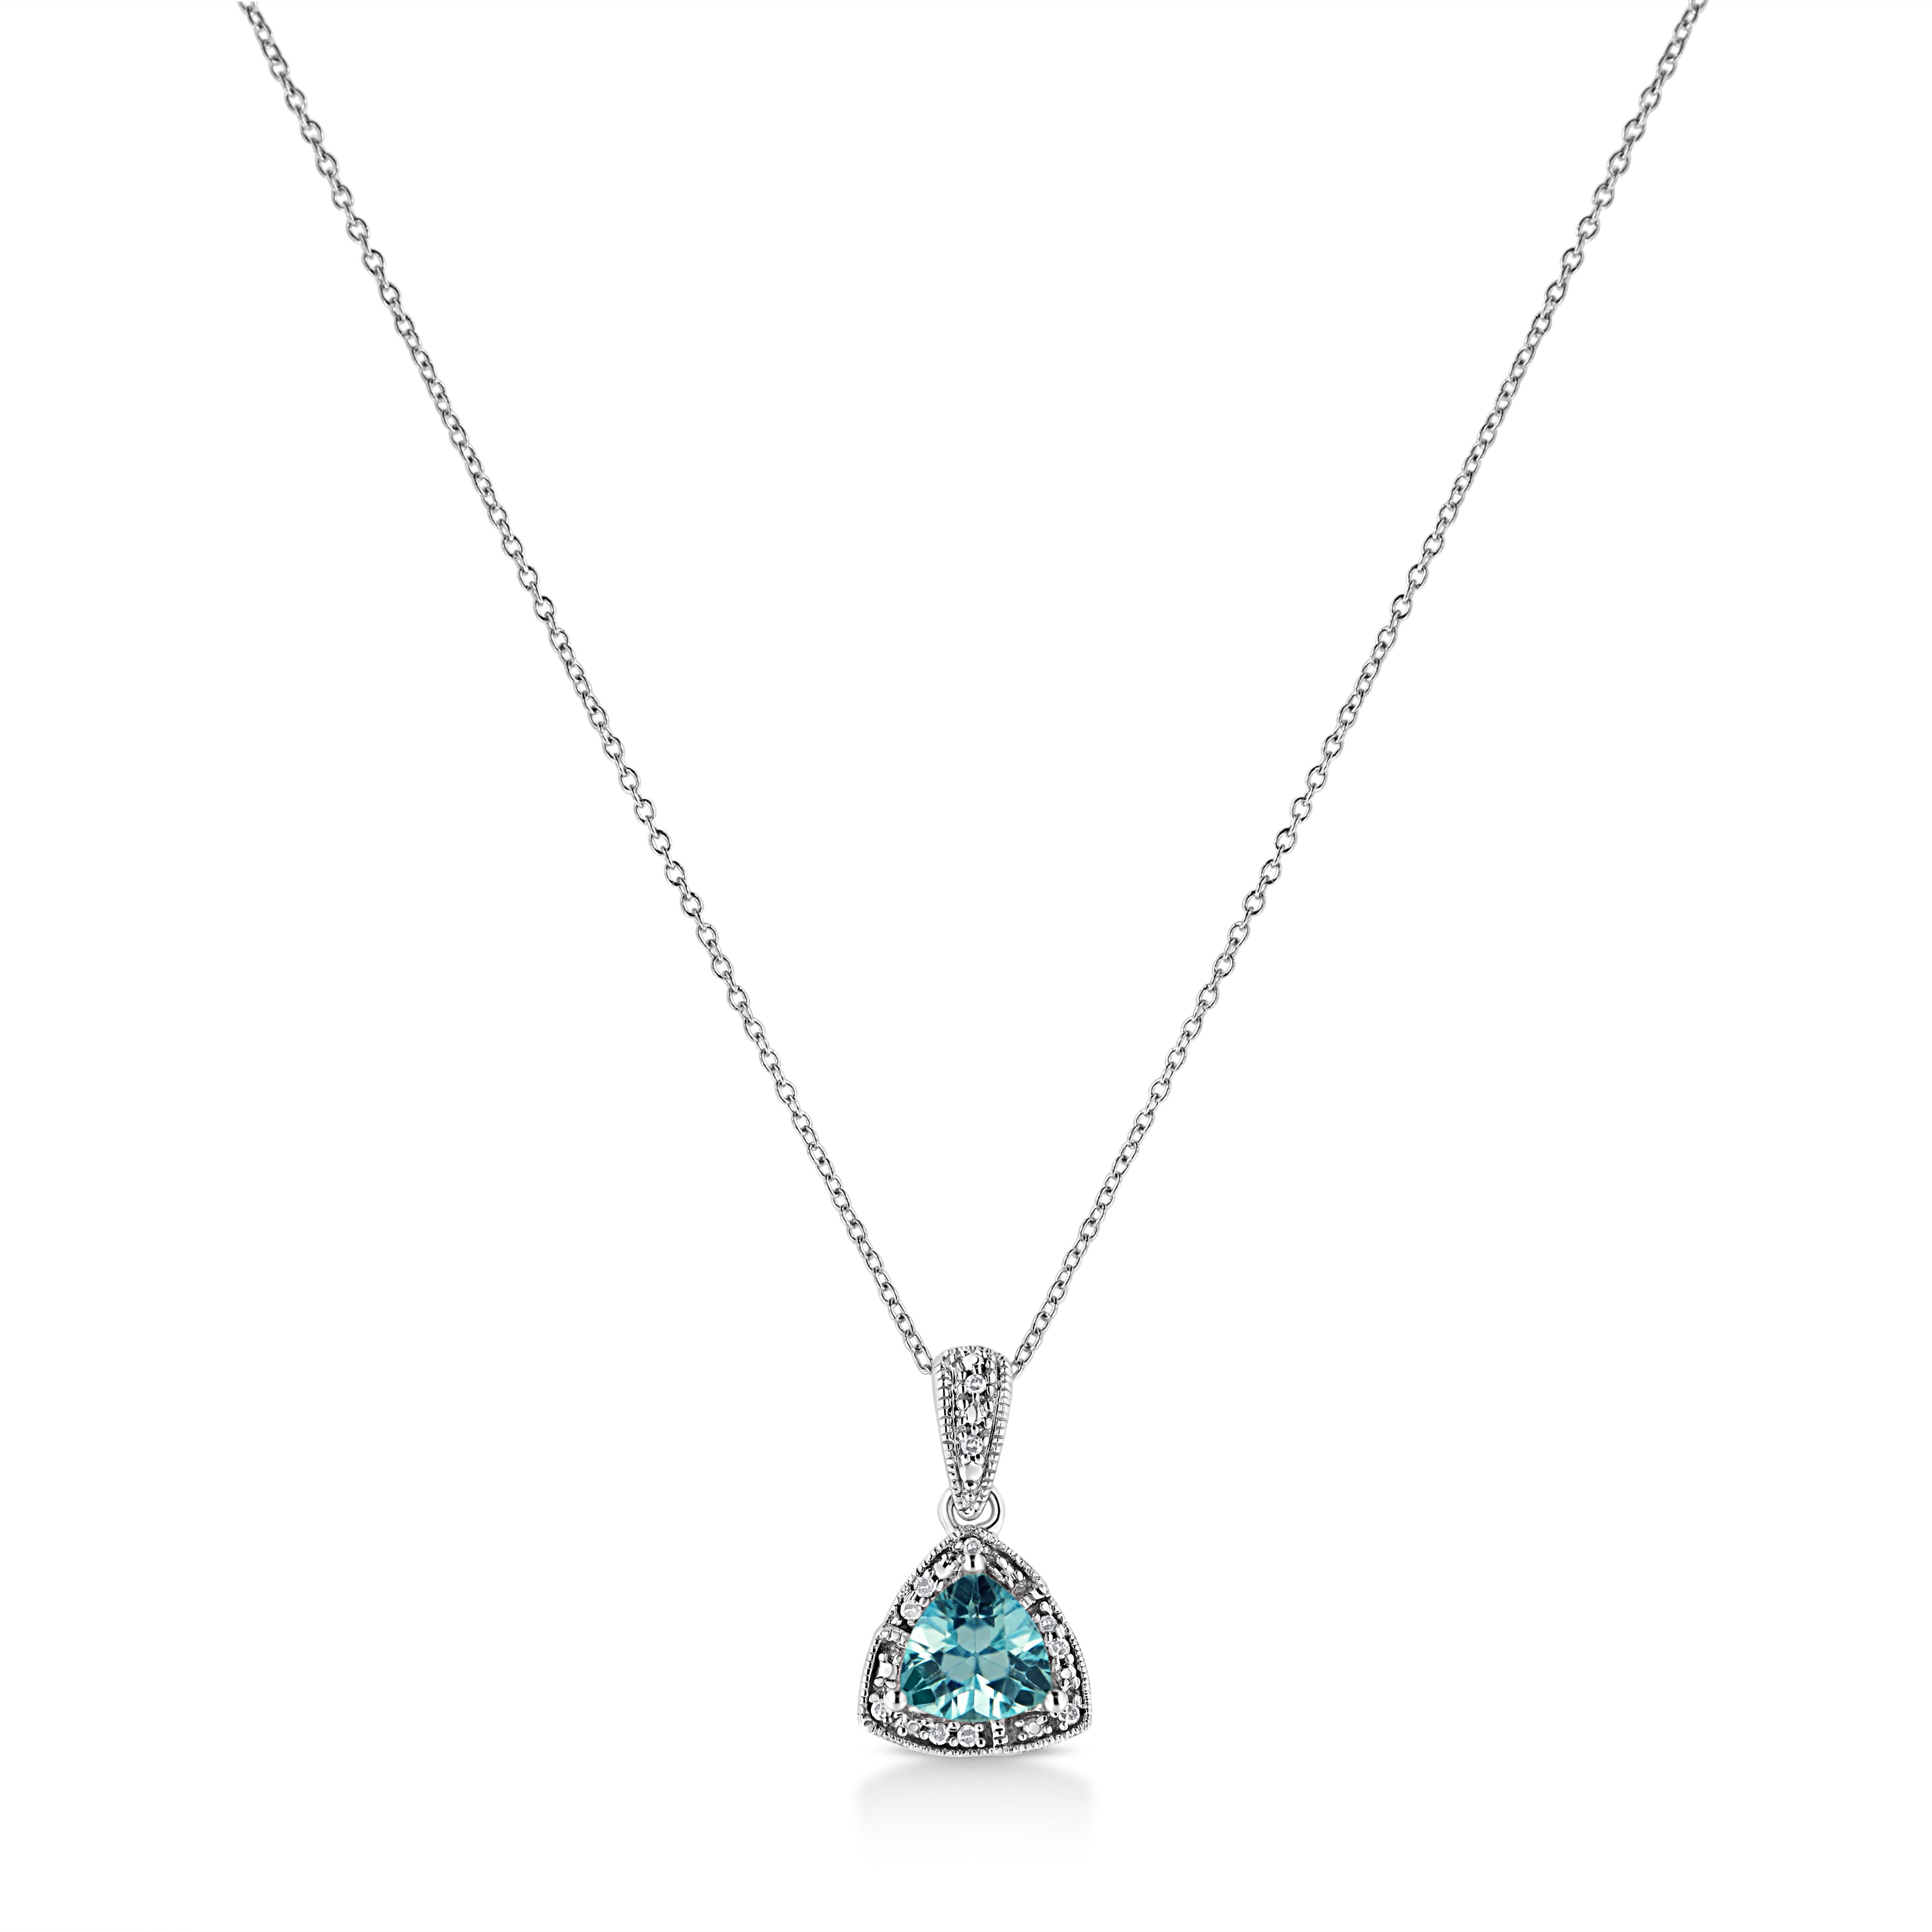 Enhance the beauty of your charming love with this elegant milgrain finish blue topaz and diamond pendant fashioned in radiant sterling silver. A large ocean blue trillion cut prong set blue topaz is haloed by 11 shimmering single cut diamonds,